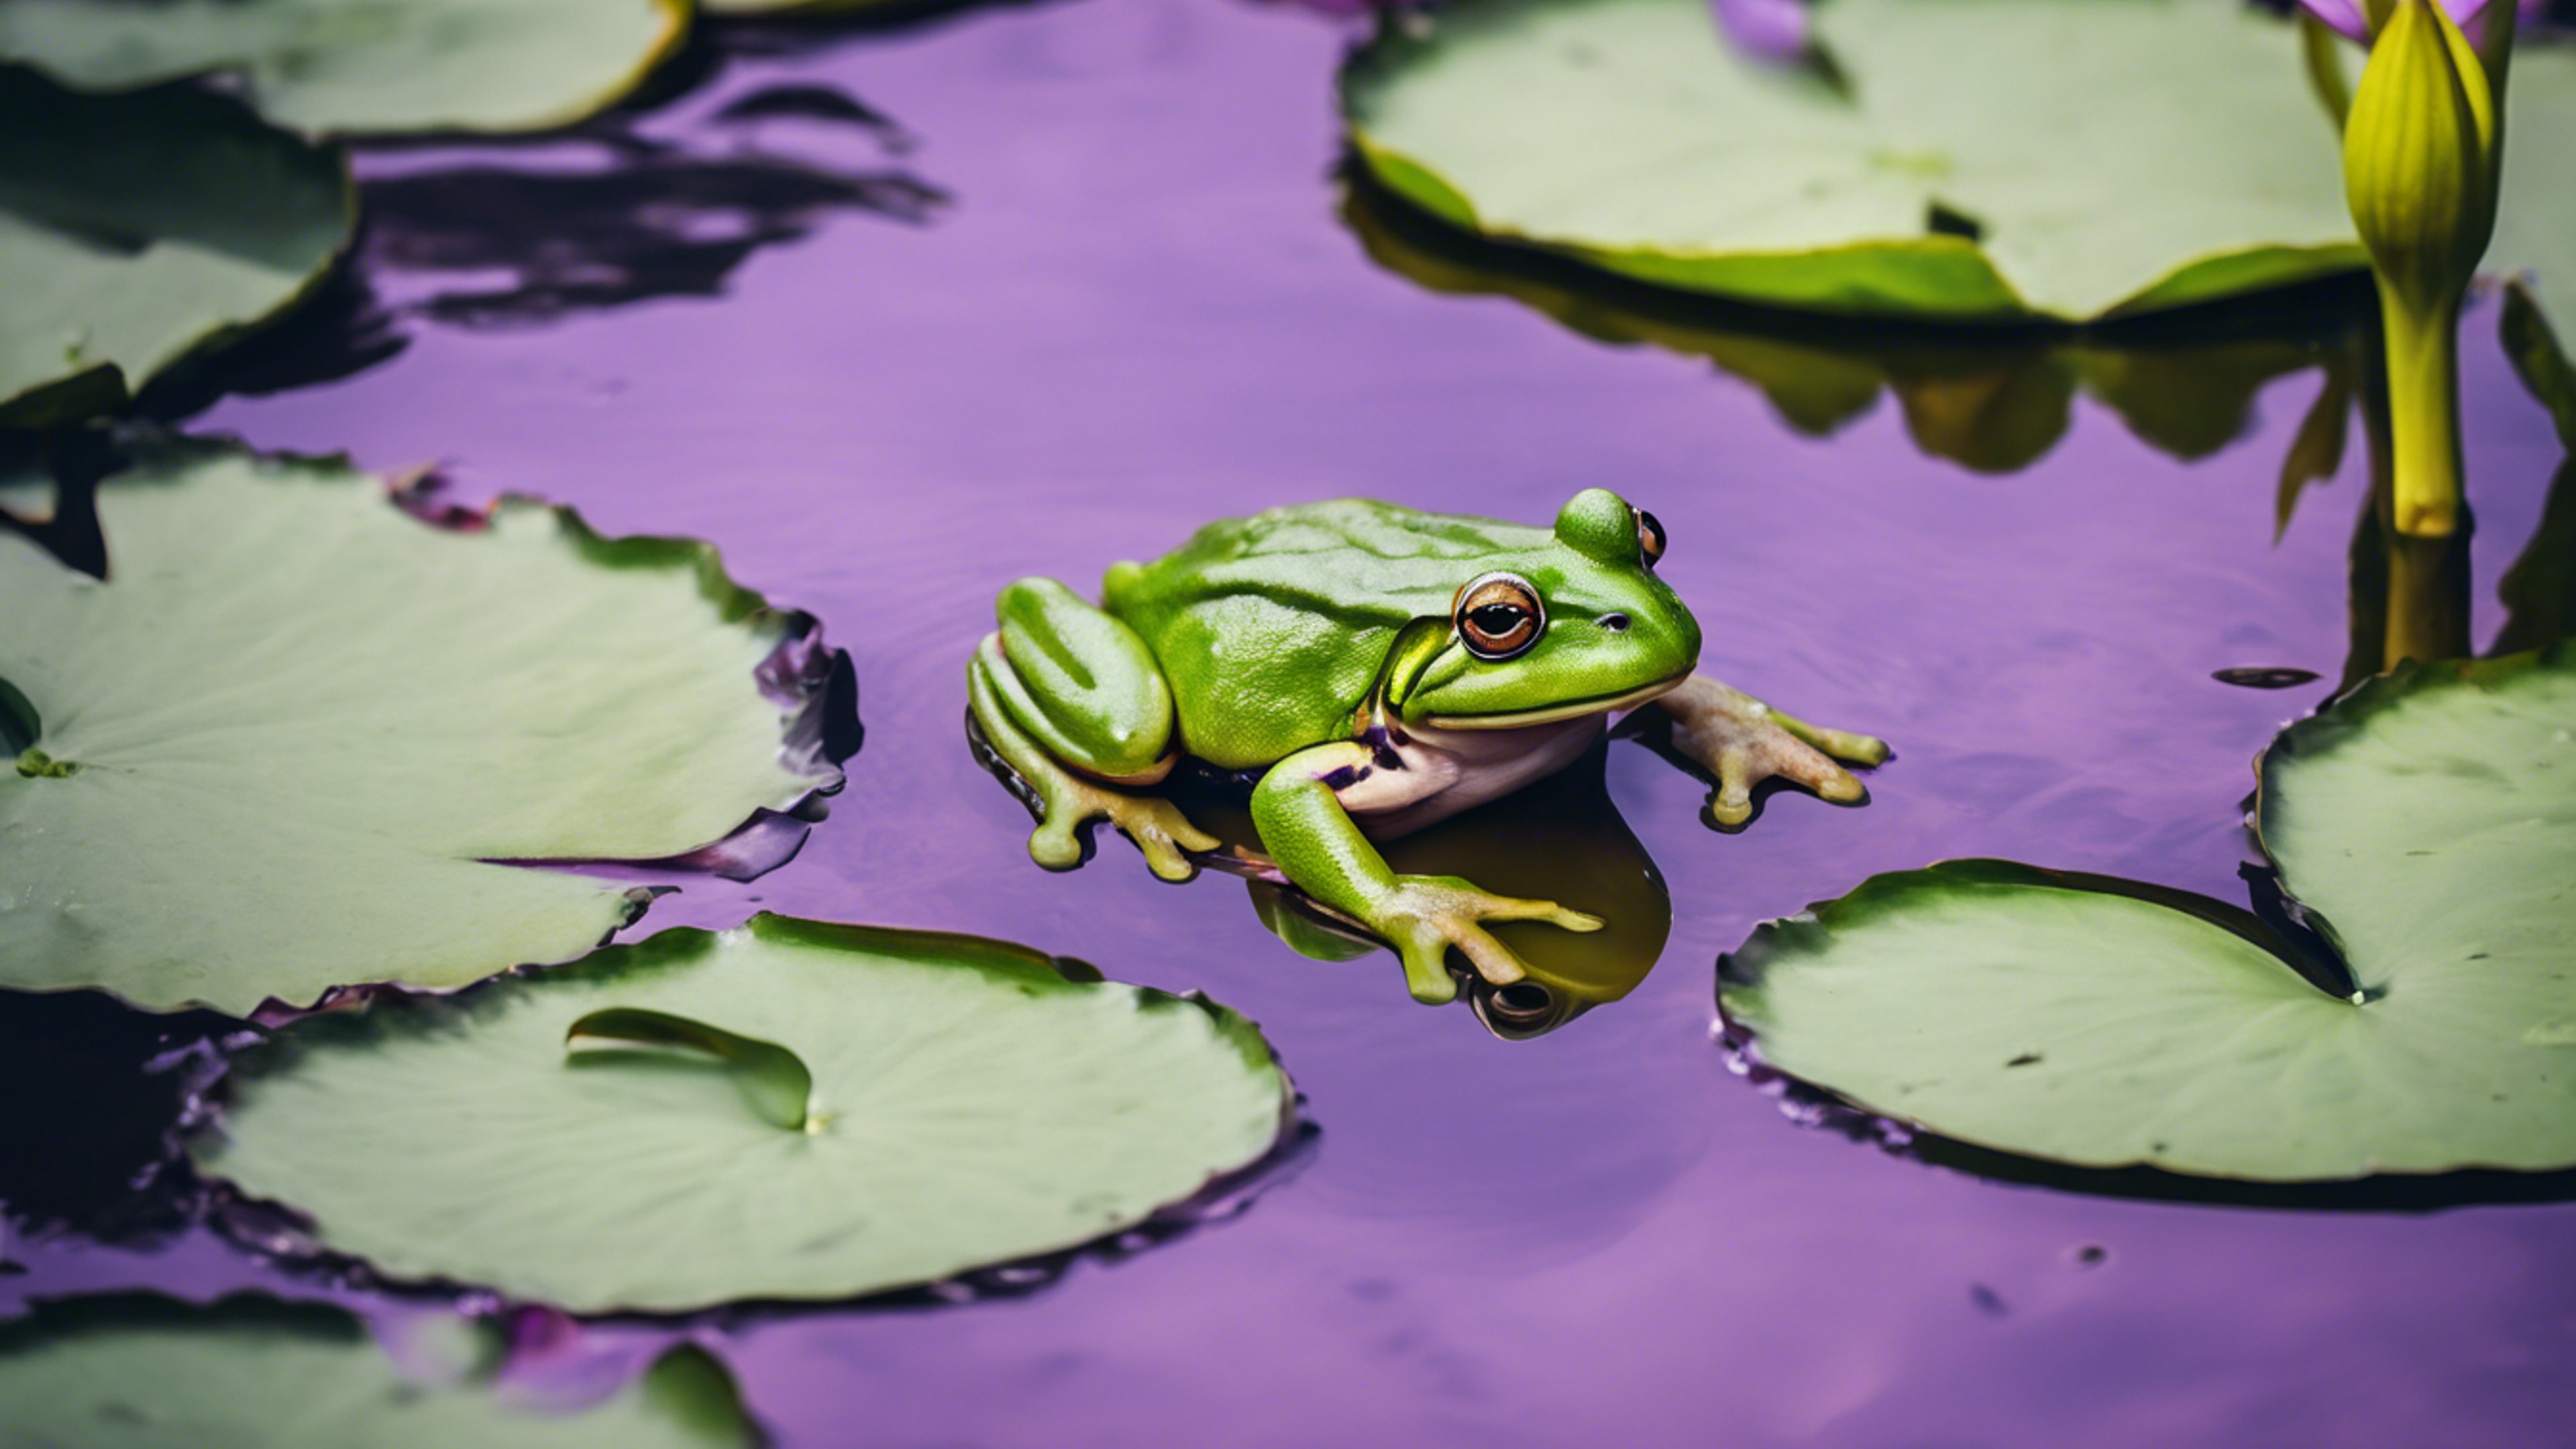 A green frog sitting on a lily pad in a pond with purple water lilies. Hình nền[d22beb1d3ca84401a5ac]